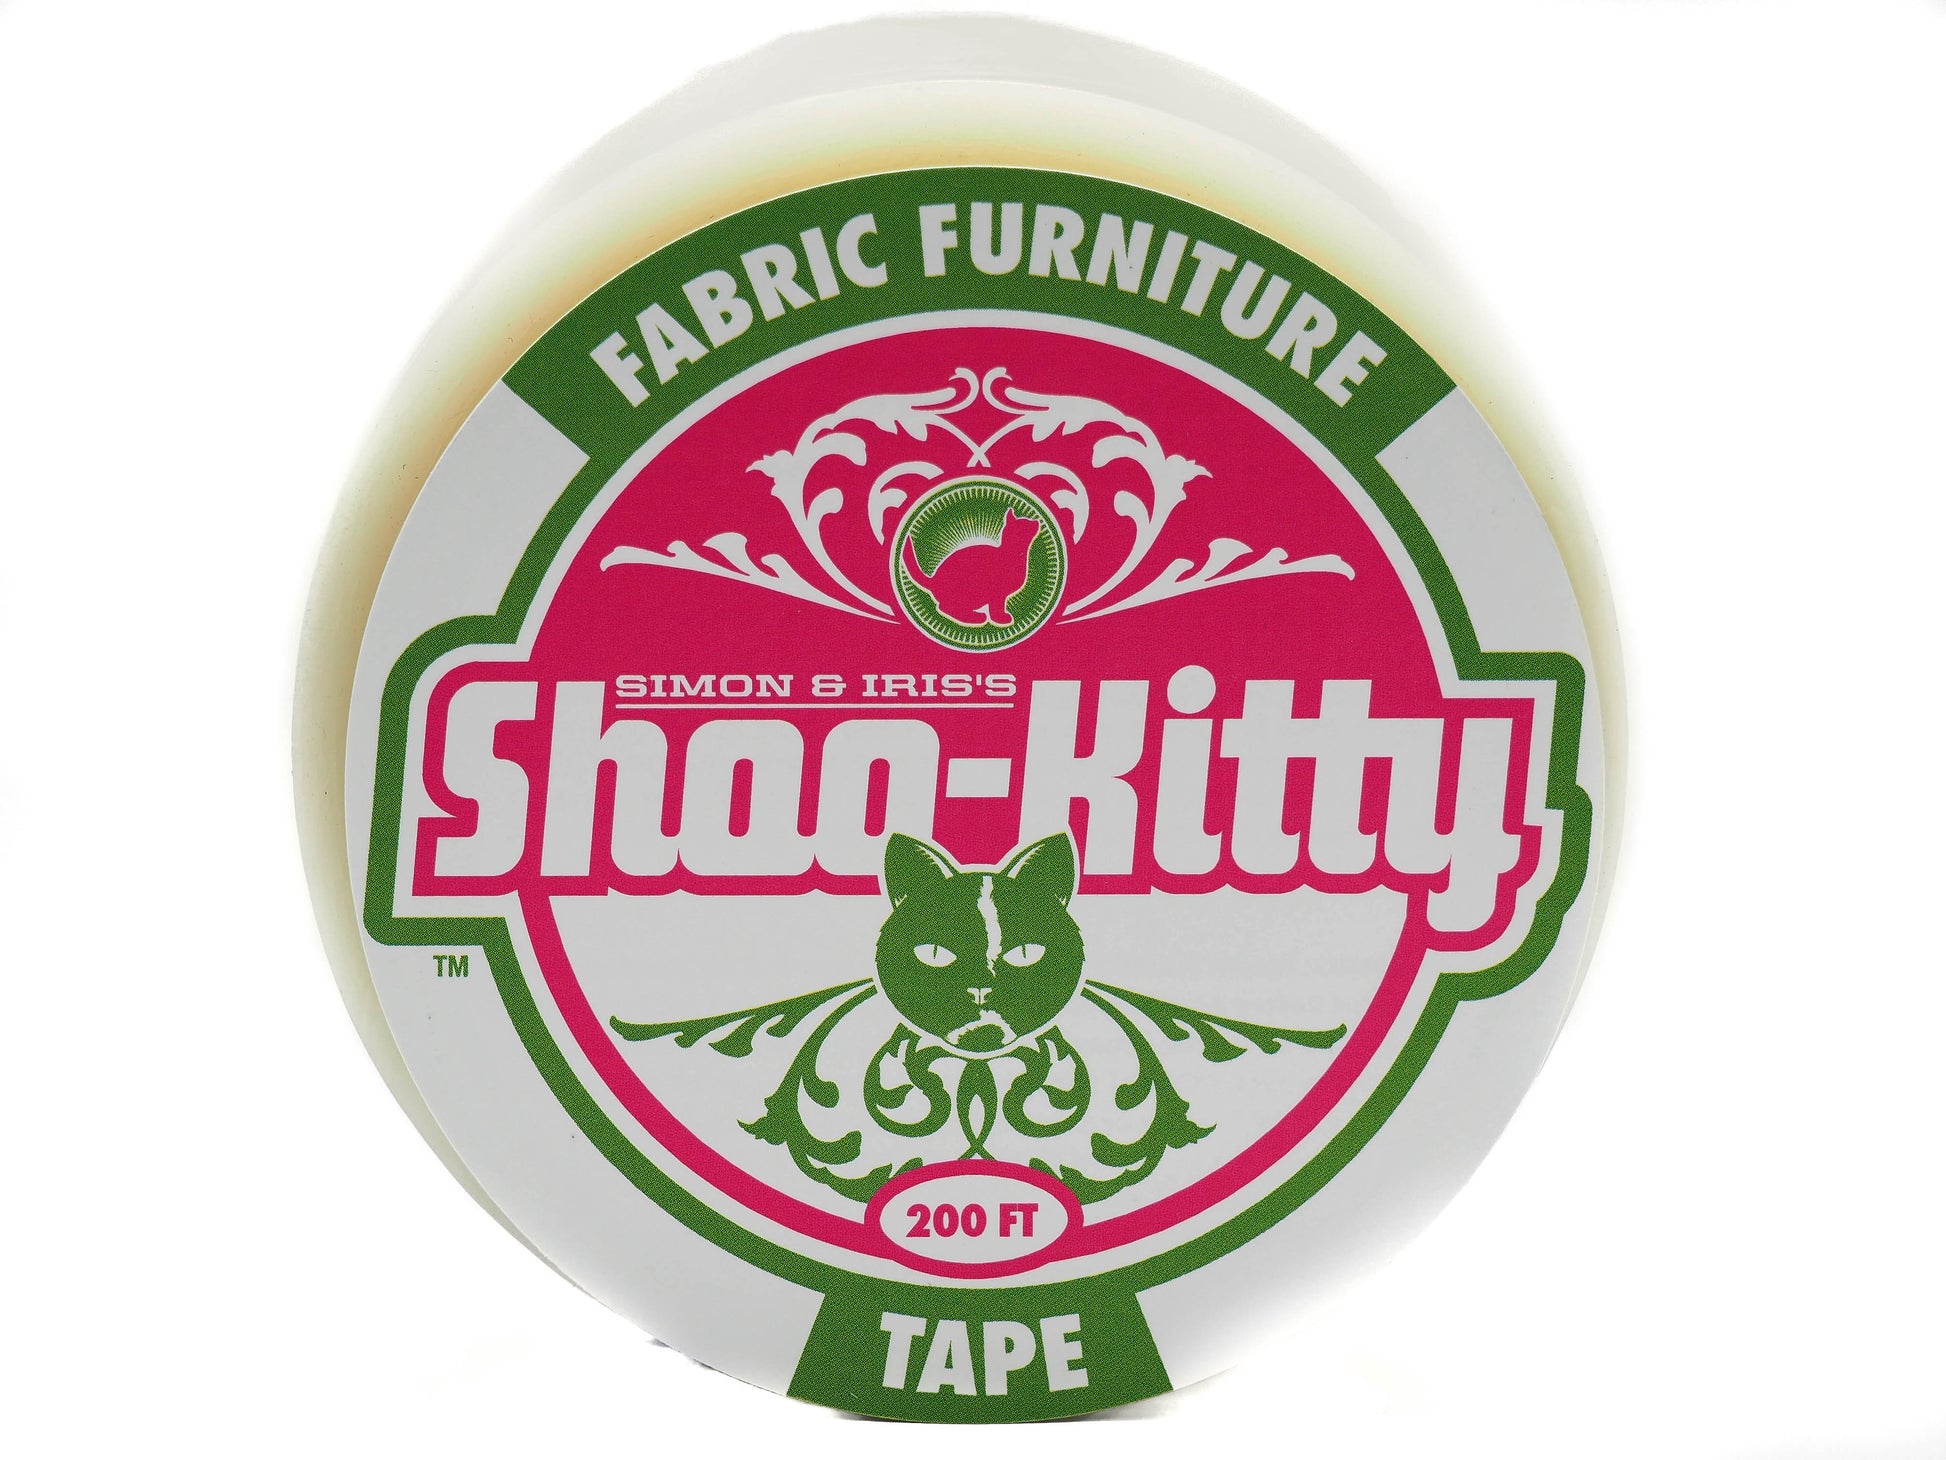 Fabric upholstery furniture tape